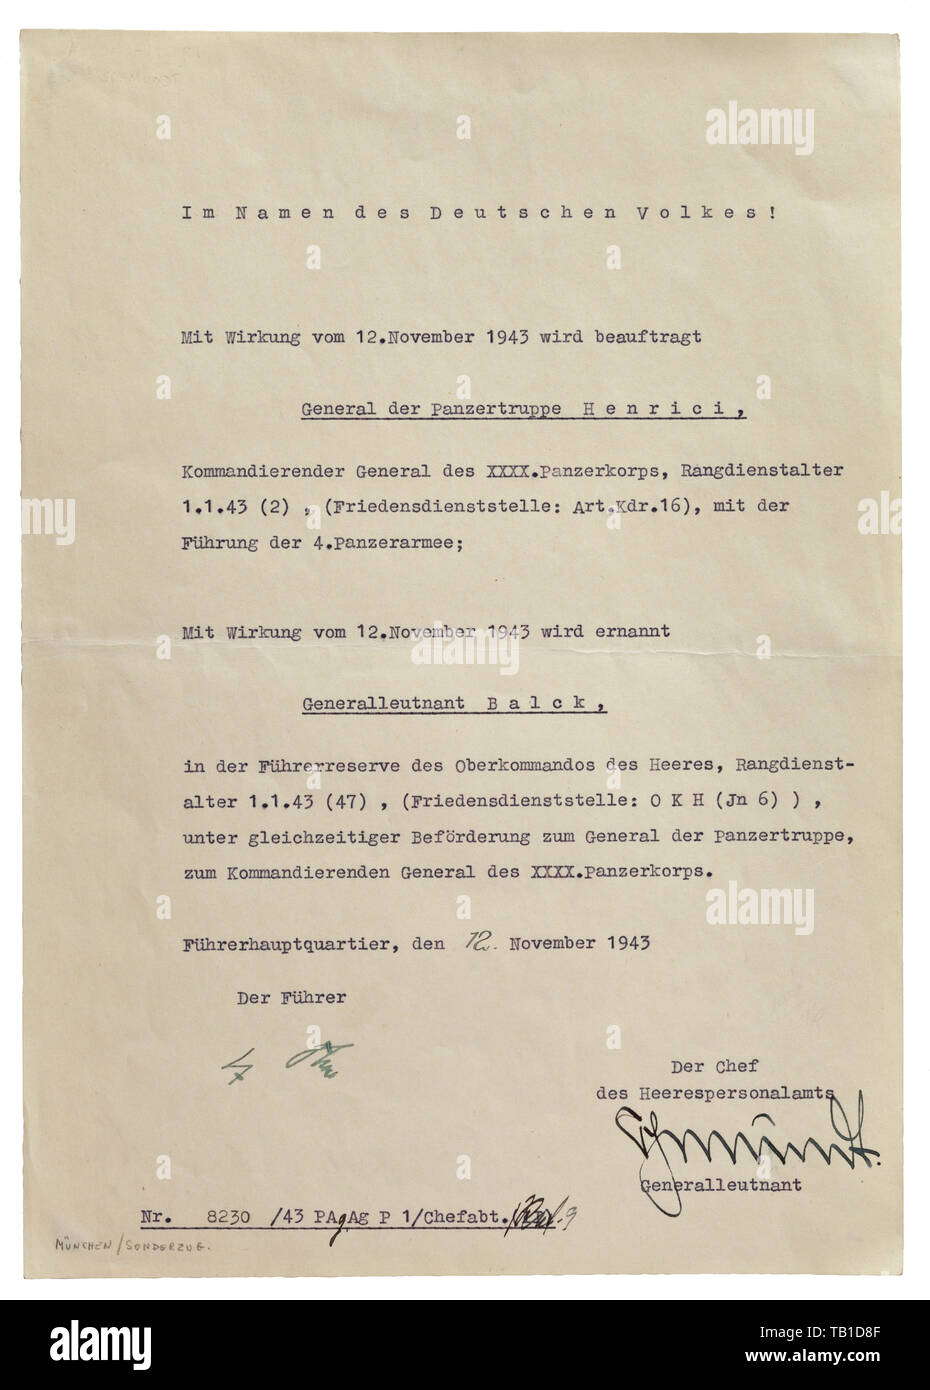 Generals of armoured units Sigfrid Henrici and Hermann Balck, Joint appointment document dated 12 November 1943 with original ink signatures of Adolf Hitler and Rudolf Schmundt. Sigfrid Henrici's appointment is to the command of 4th Panzer Army, Balck is to succeed Henrici as commanding general of 40th Panzer Corps. Folded. Sigfrid Henrici (1889 - 1964) commanded 16th Infantry Division (mot) at the onset of the Russian campaign and was awarded the Knight's Cross on 13 October 1941 for the division's su 20th century, Additional-Rights-Clearance-Info-Not-Available Stock Photo